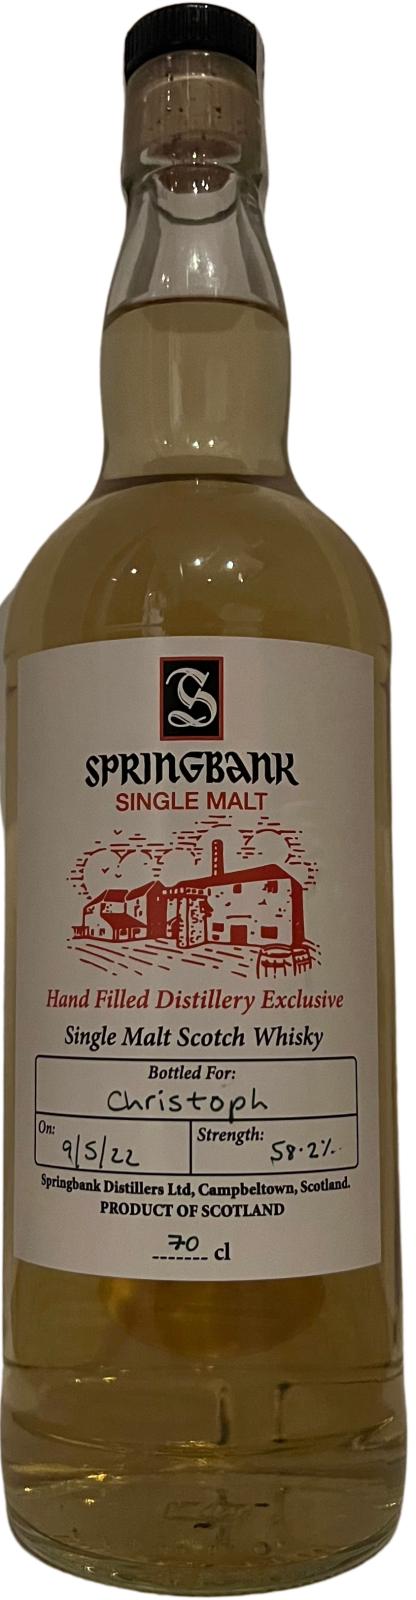 Springbank Hand Filled Distillery Exclusive 58.2% 700ml